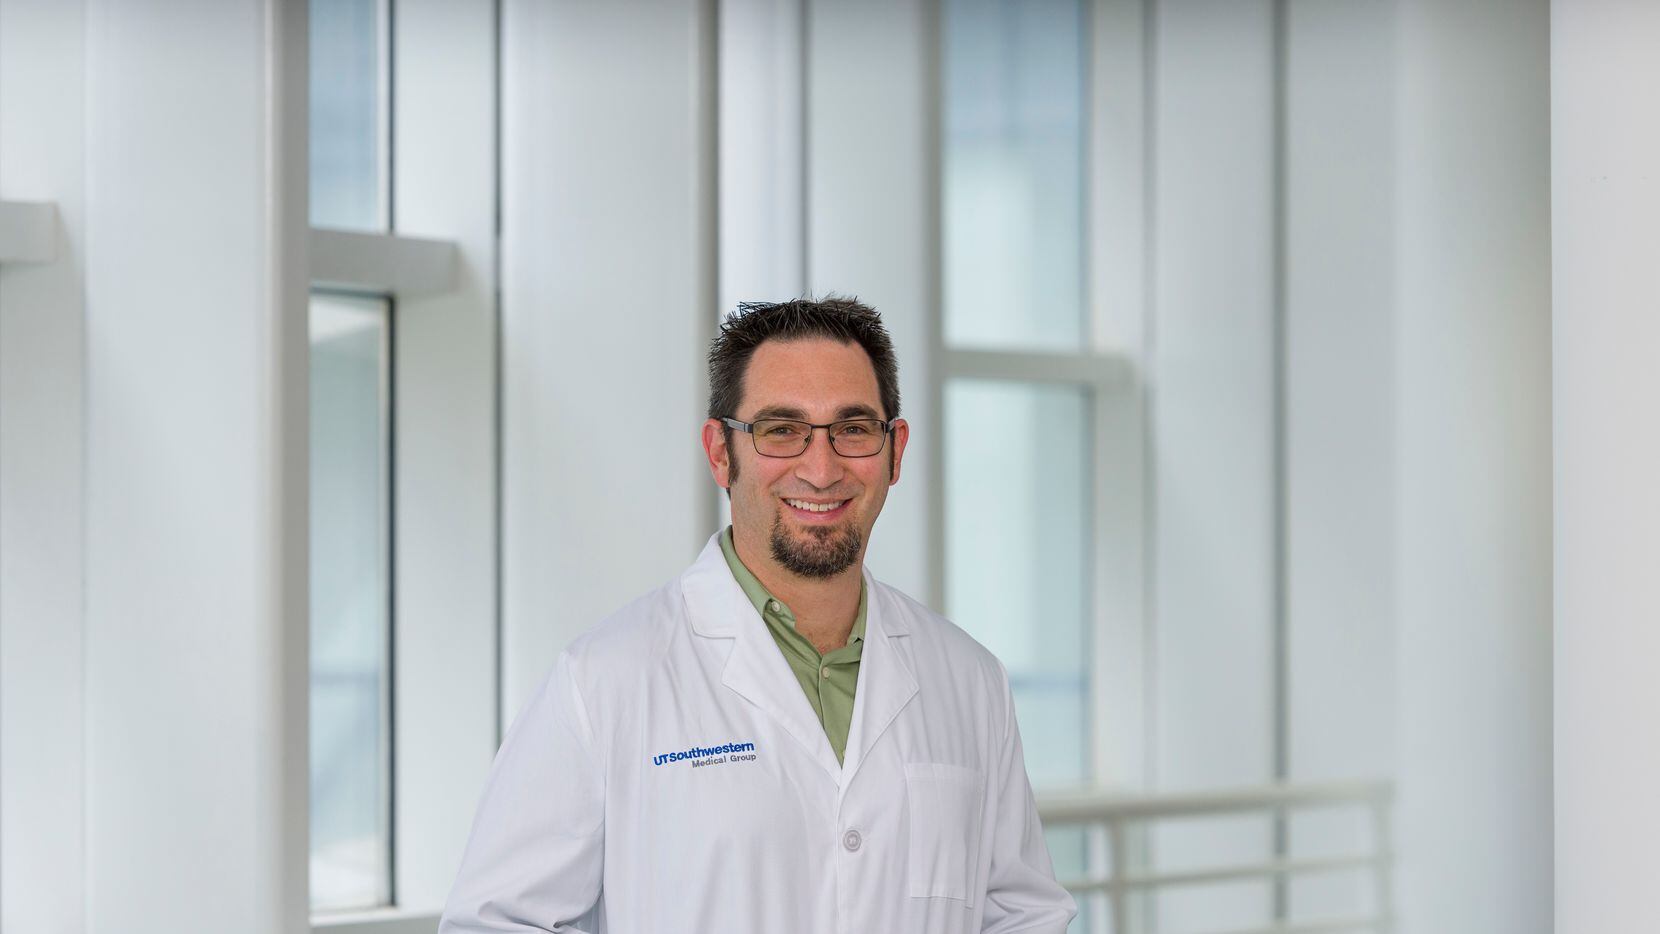 Dr. Todd Aguilera is a cancer survivor who has dedicated his career to treating difficult...